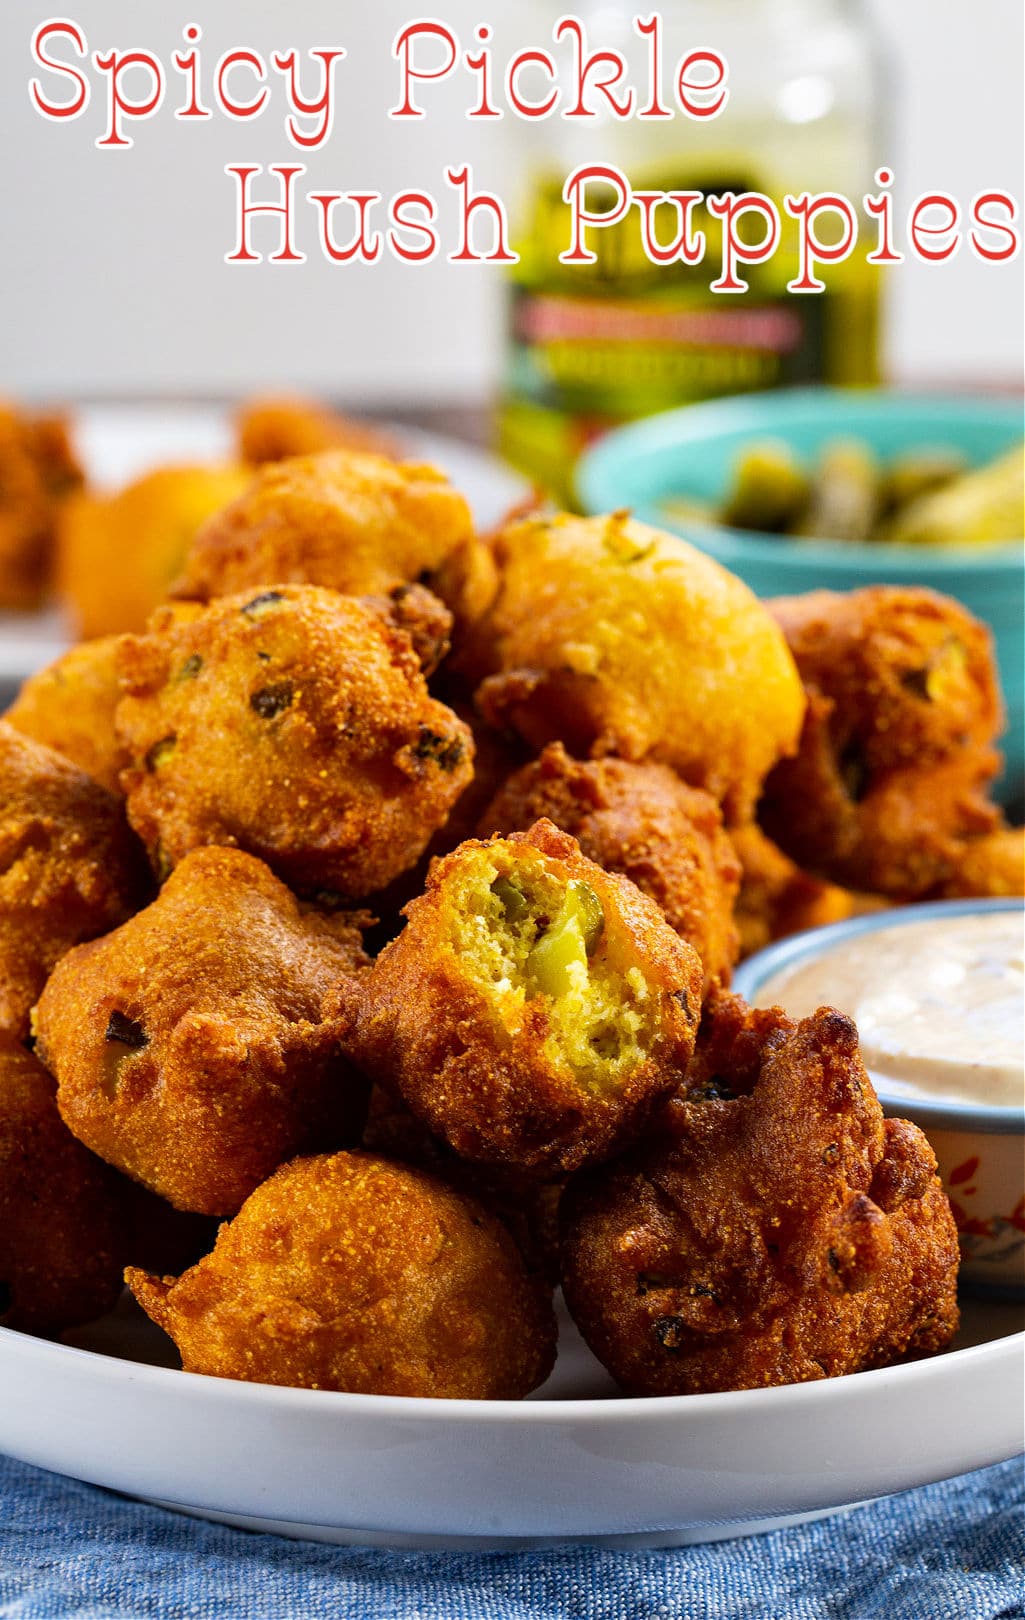 Plate of Spicy Pickle Hush Puppies with bite out of one hush puppy.